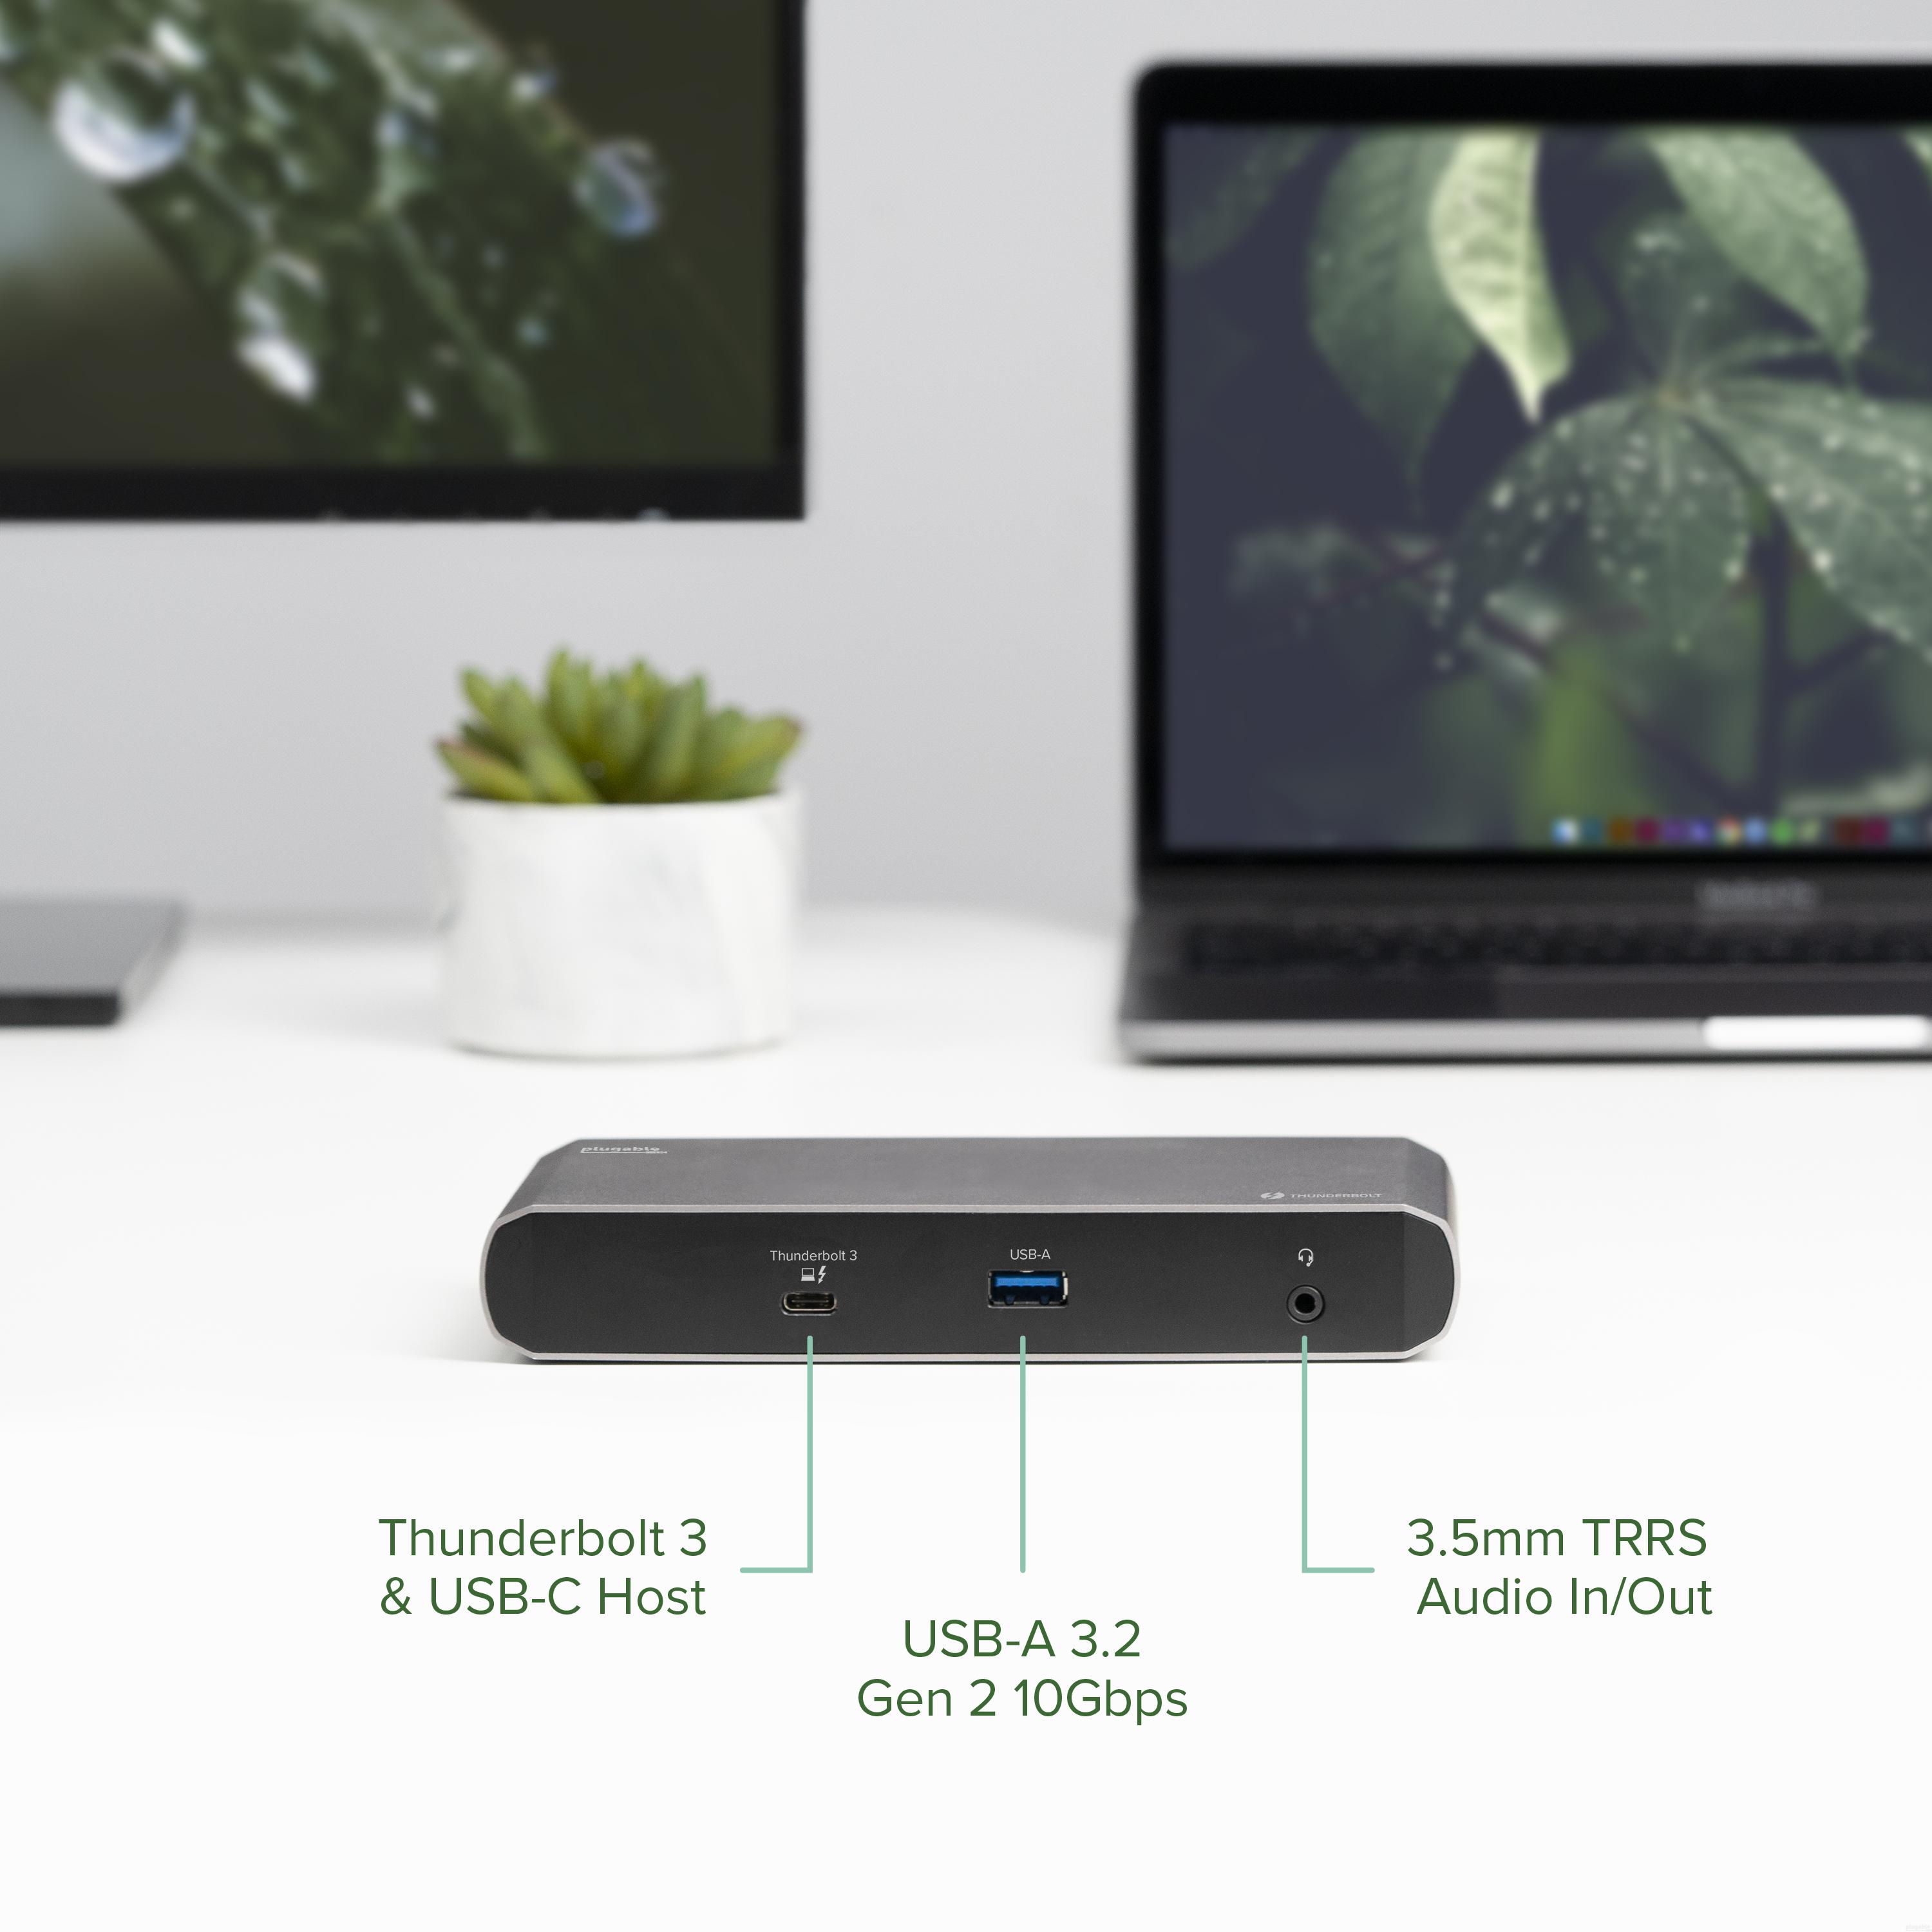 Plugable Thunderbolt 3 and USB C Dock with 60W Charging, Compatible with MacBook / MacBook Pro and Windows, Dual DisplayPort or HDMI with Included Adapter, 2x USB-C, 3x USB 3.0, Gigabit Ethernet - image 6 of 7